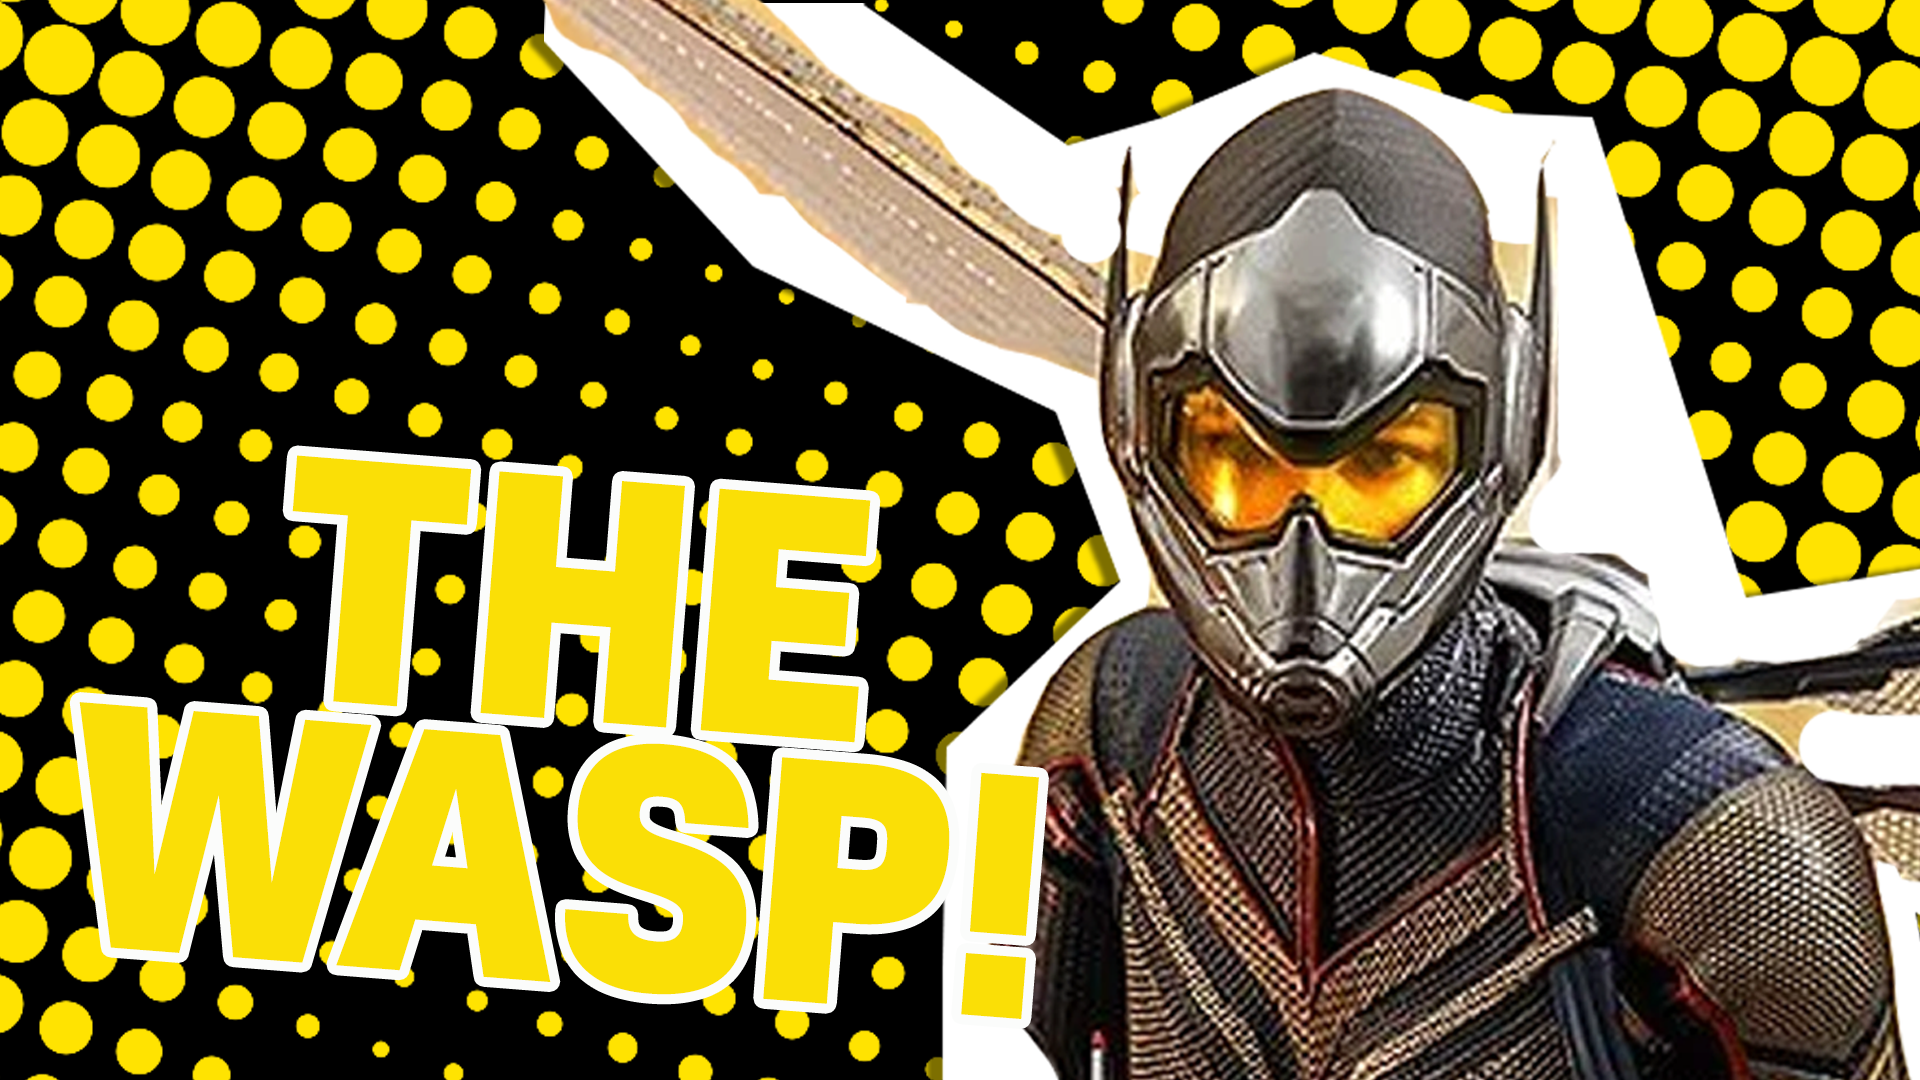 The Wasp result